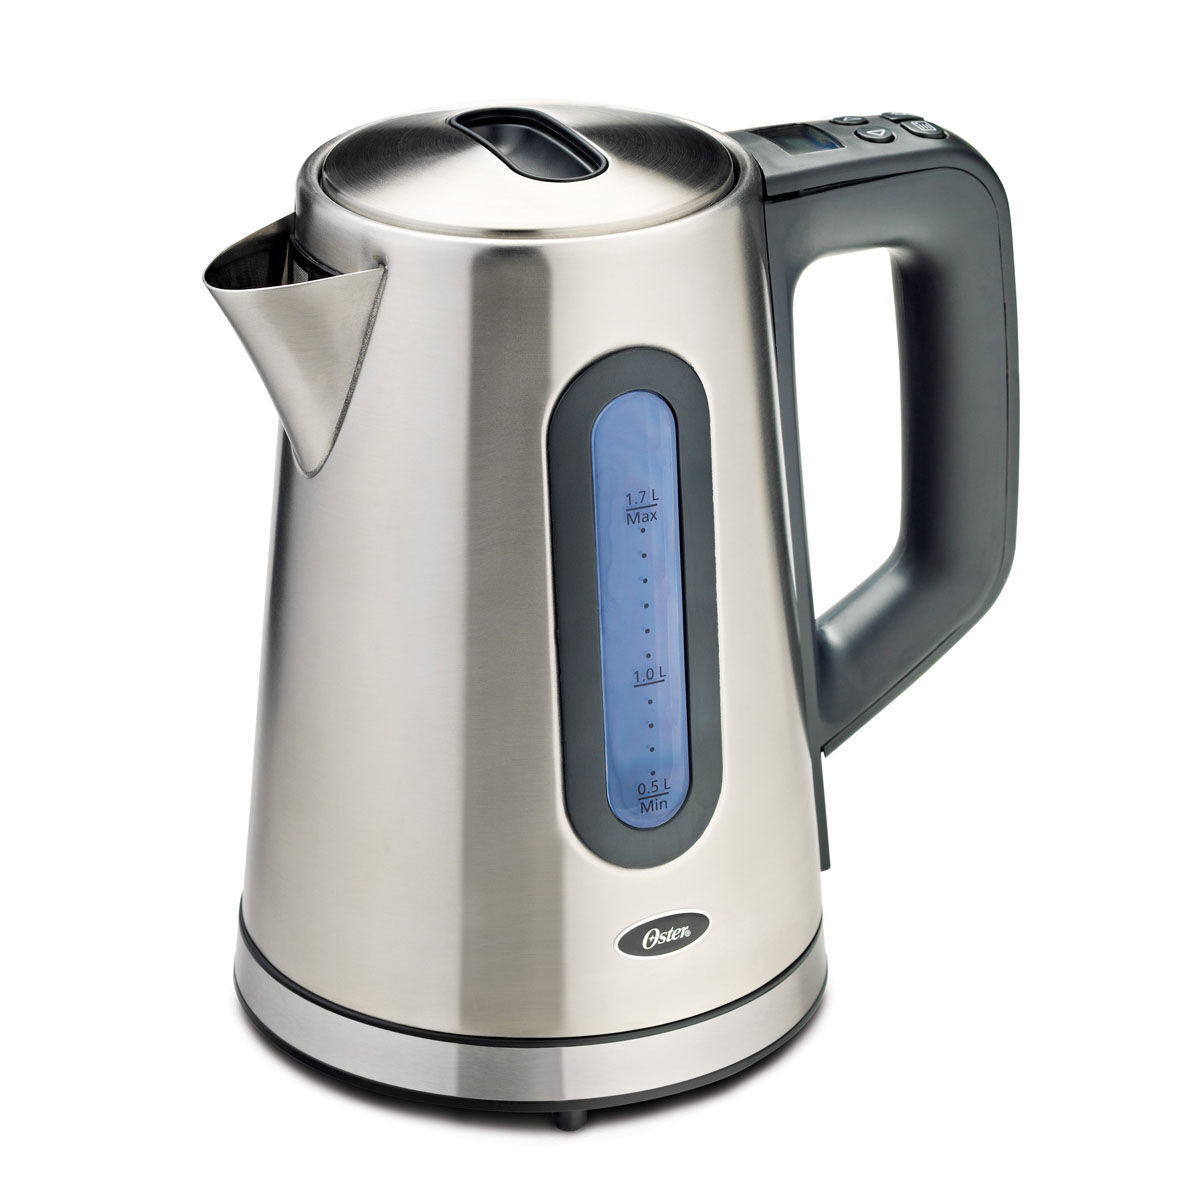 Oster® 1.7L Variable Temperature Kettle 